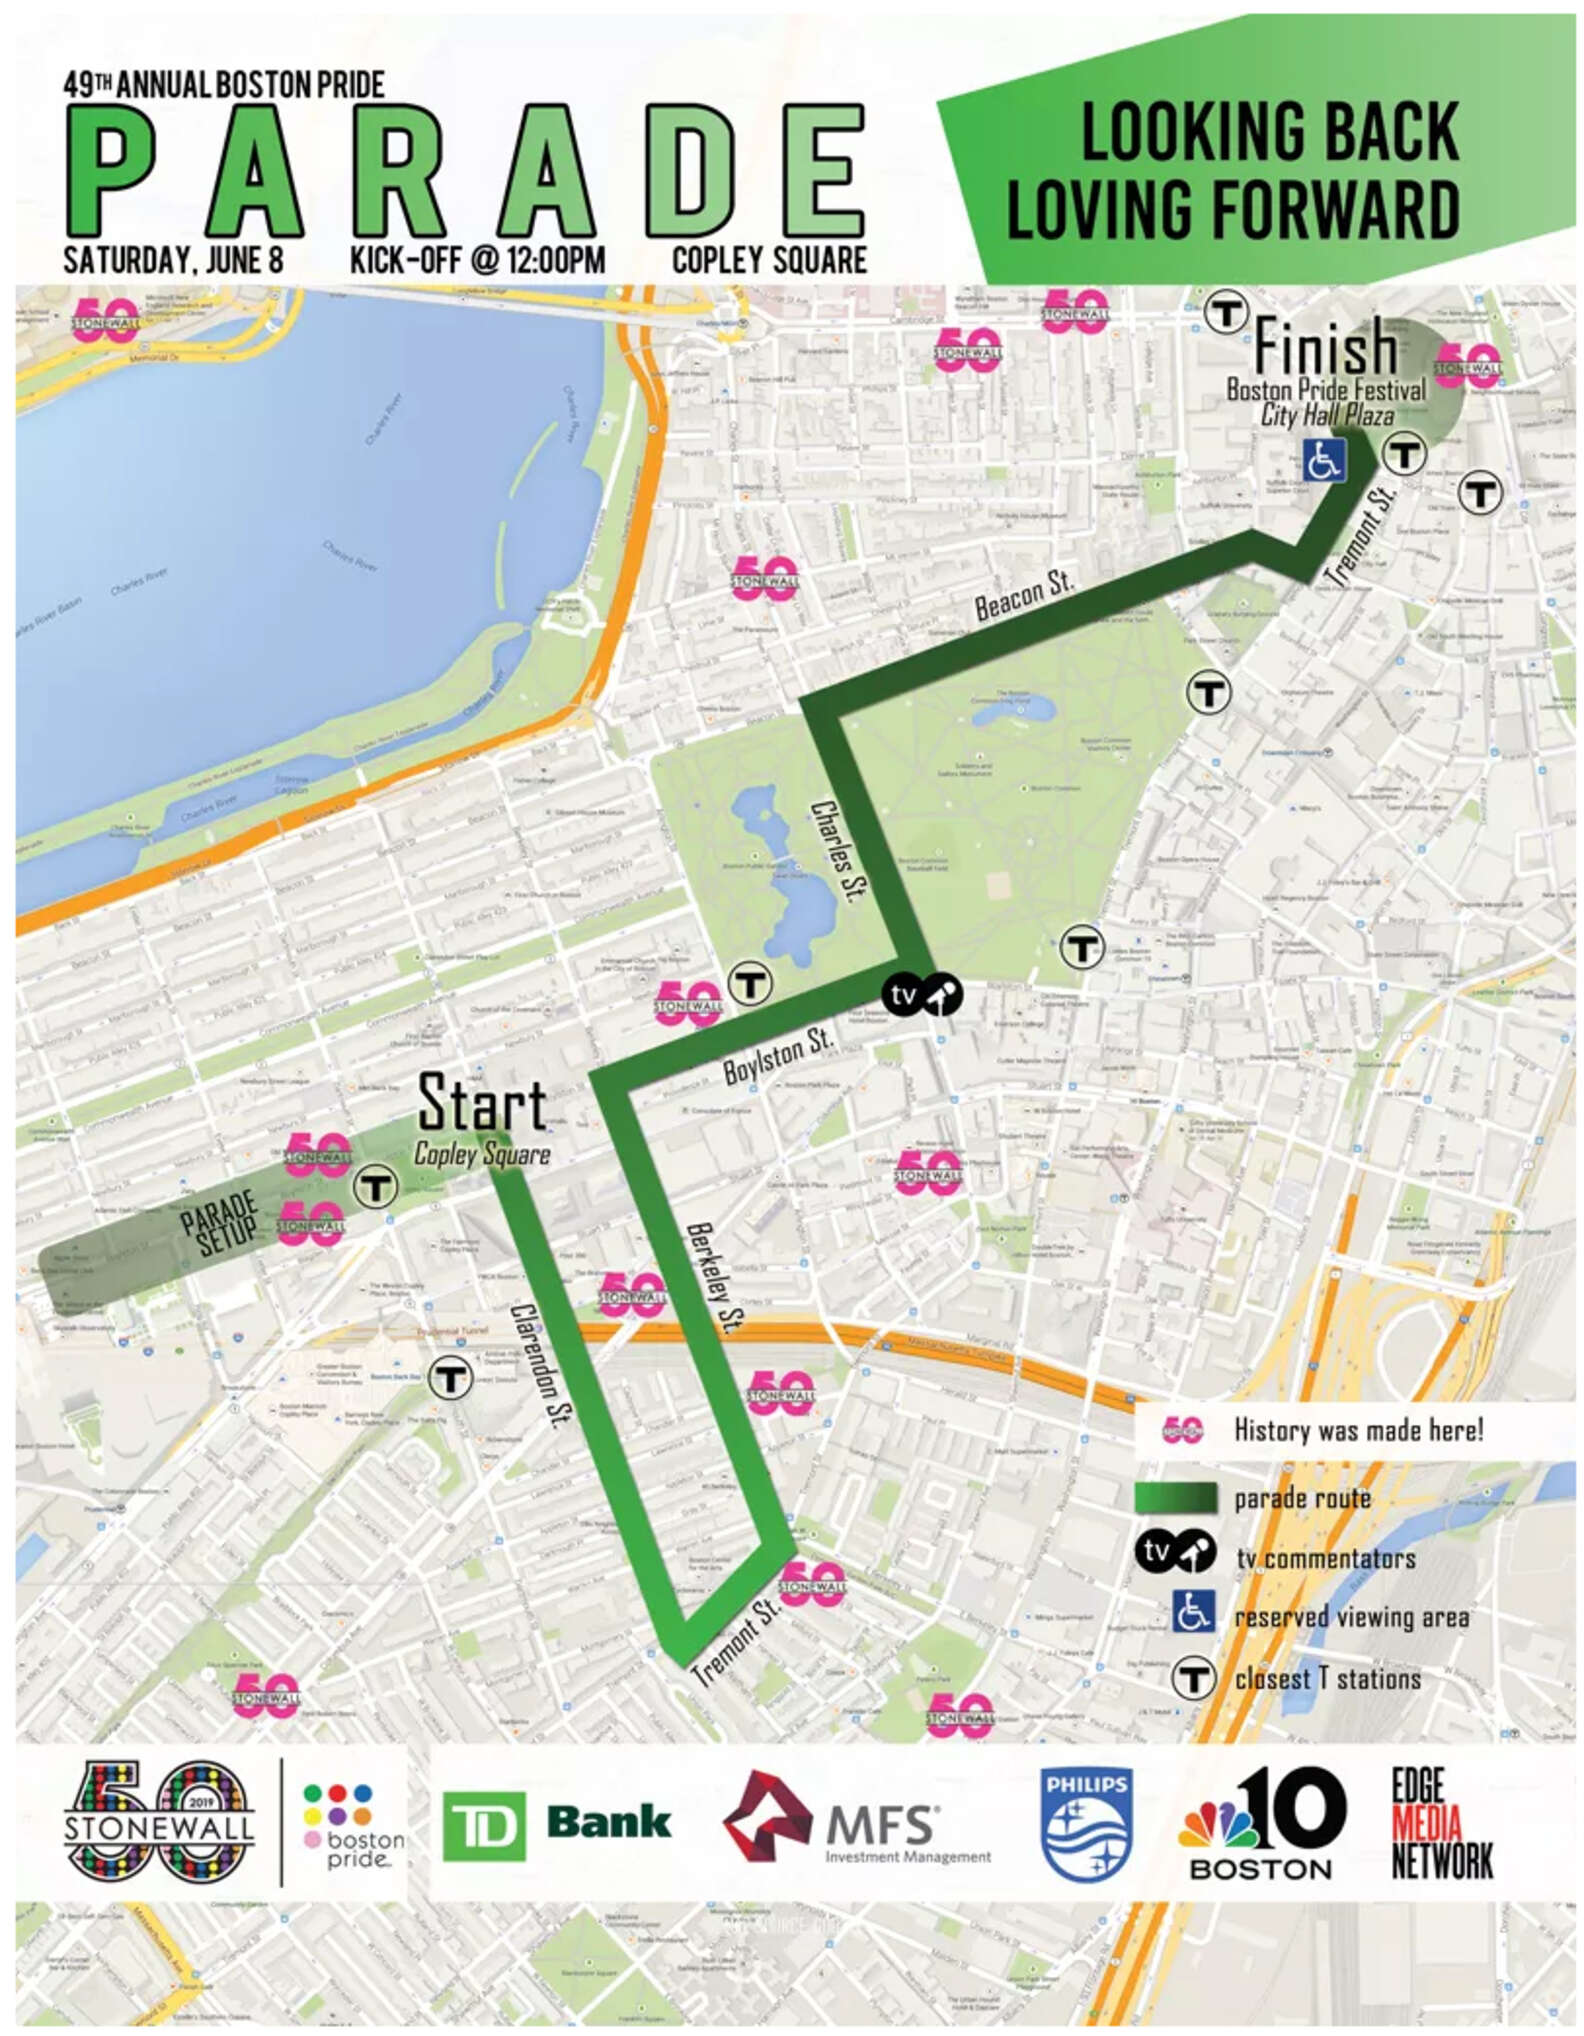 Boston Gay Pride Parade 2019 Route, Start Time, Road Closures, & More